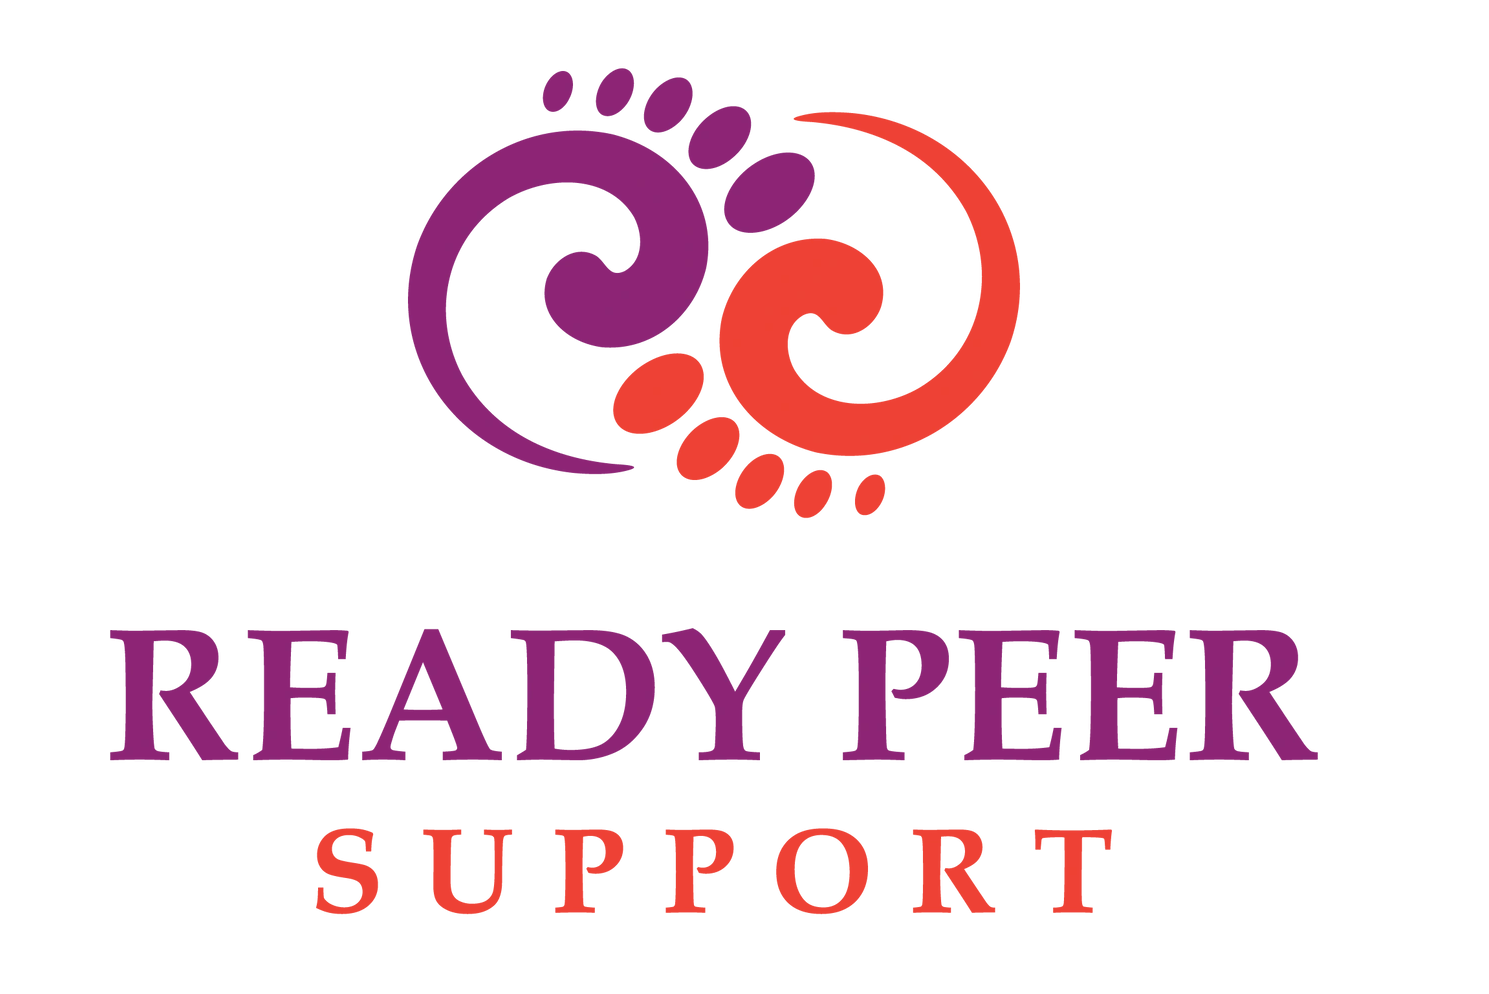 A logo for the ready peel support program.